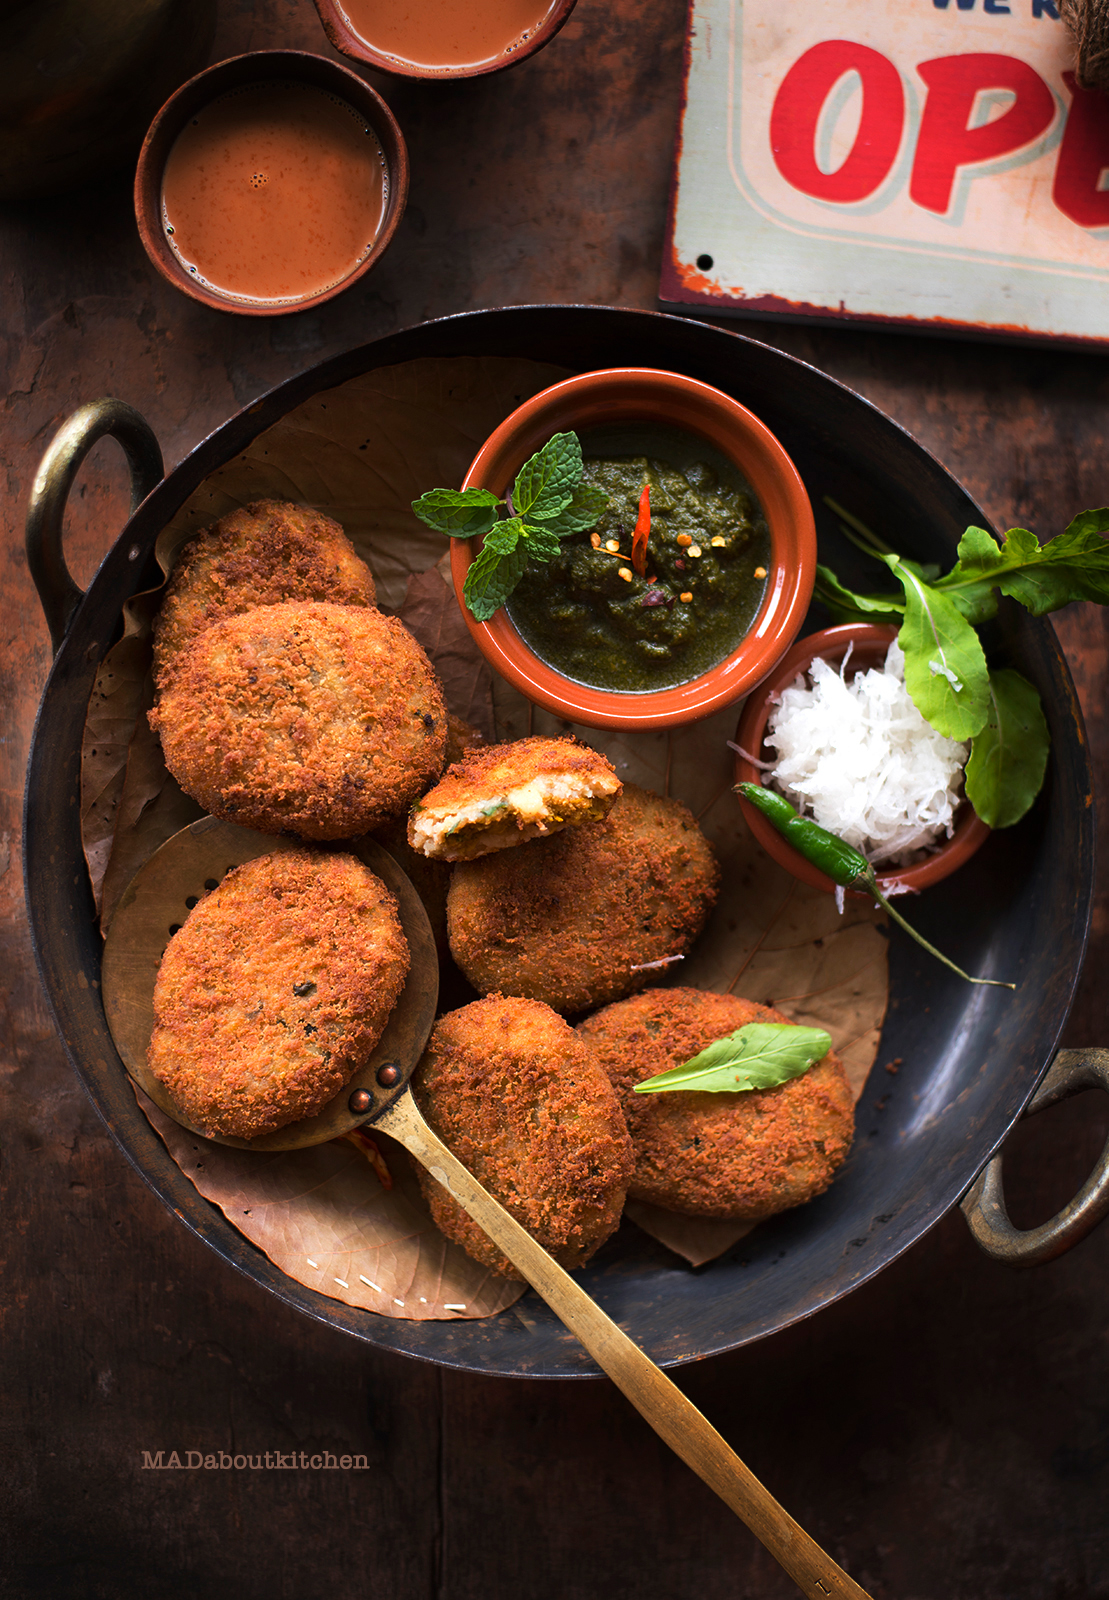 Chana Dal Tikki are cutlets stuffed with spicy lentil mixture which are perfect for this weather. These spicy patties are perfect teatime snack.